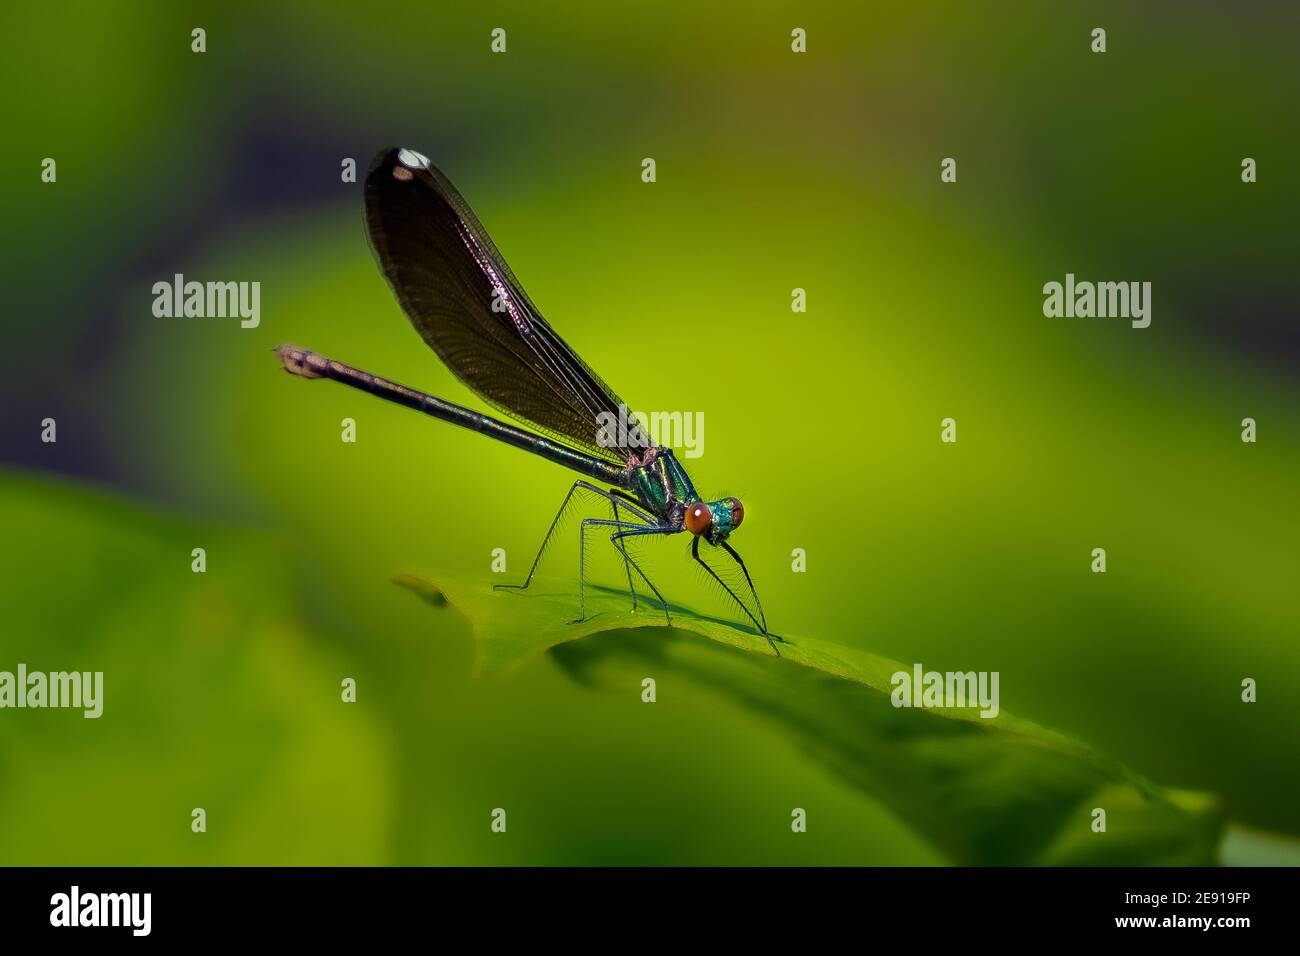 An Ebony Jewelwing Damselfly (Calopteryx maculata) perched on the edge of a leaf. Stock Photo